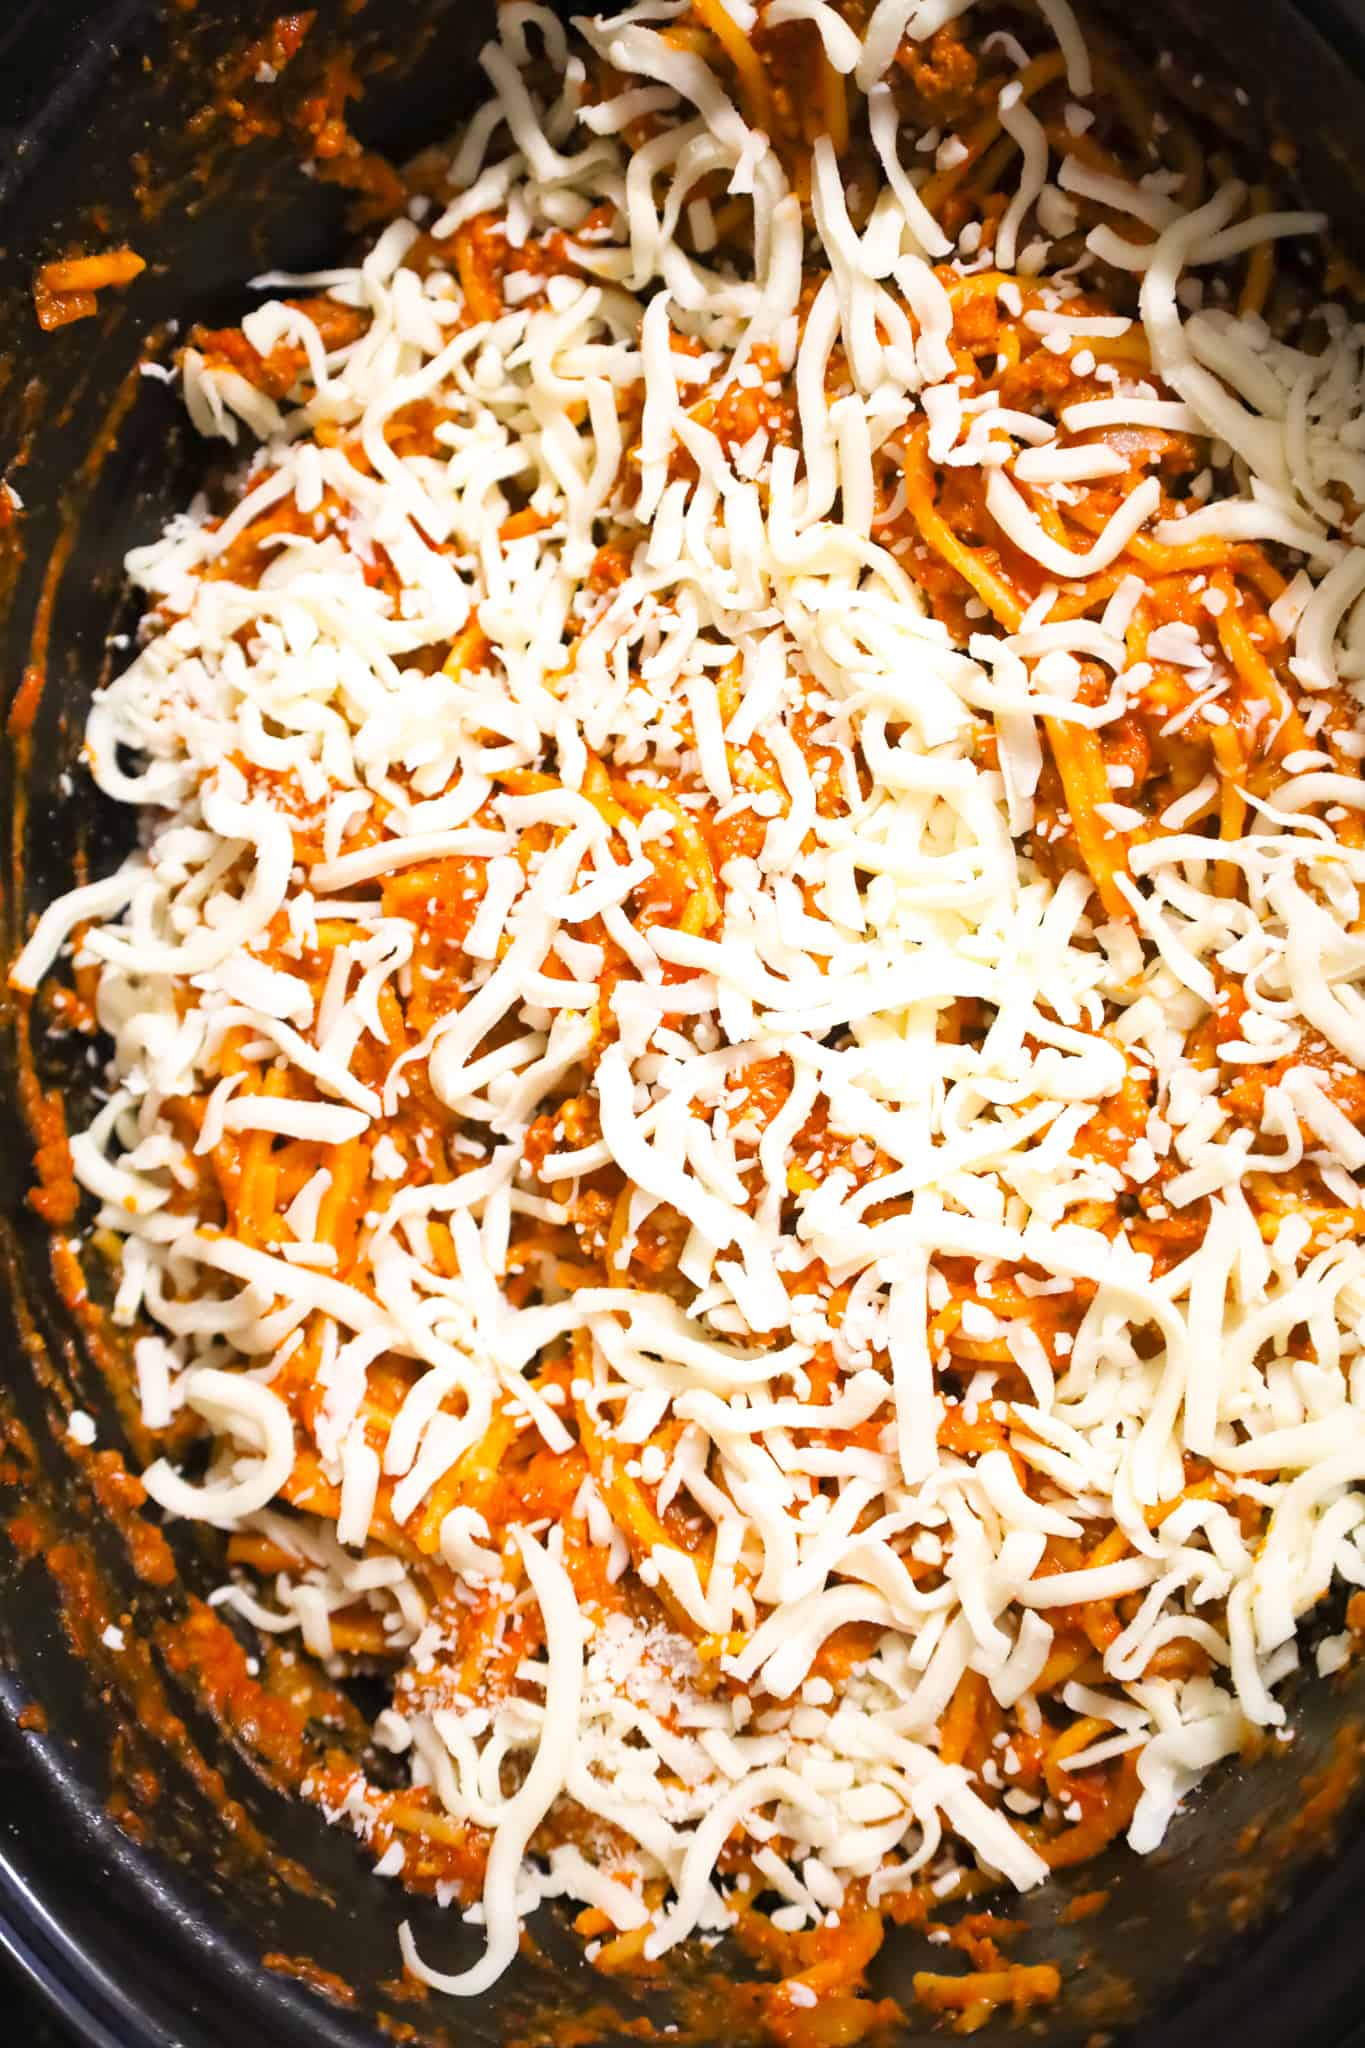 shredded mozzarella cheese on top of spaghetti and meat sauce in a crock pot